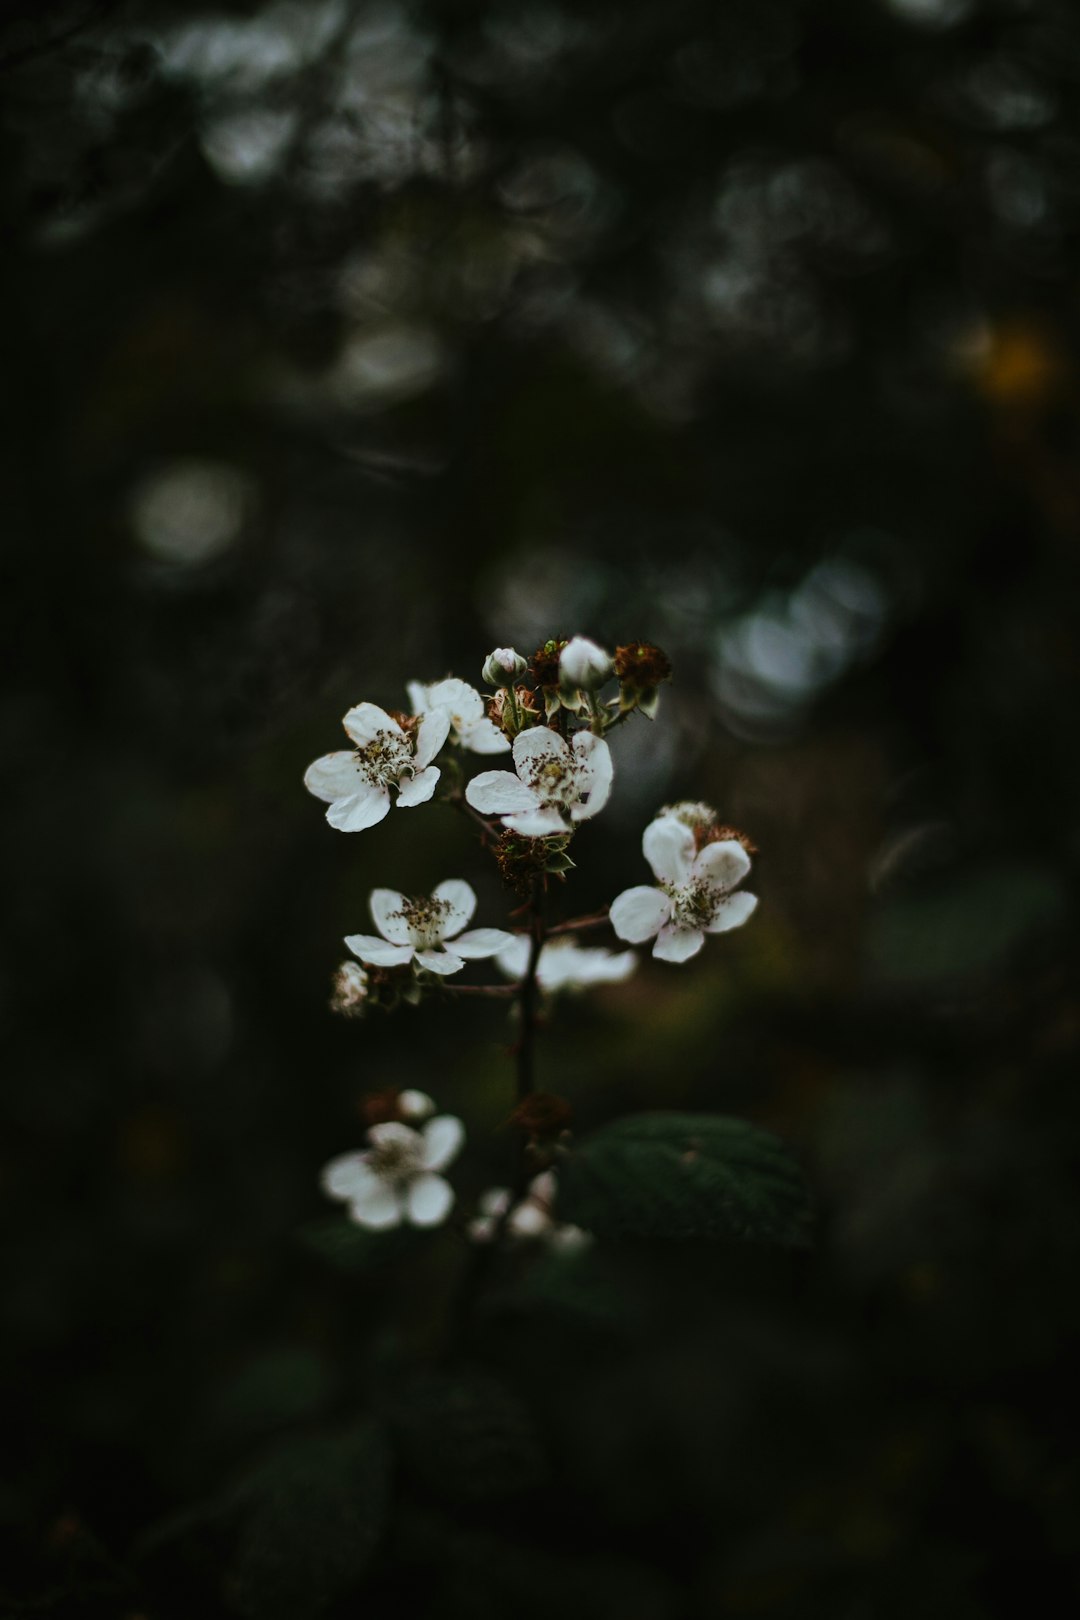 white flowers with green leaves photo – Free Grey Image on Unsplash